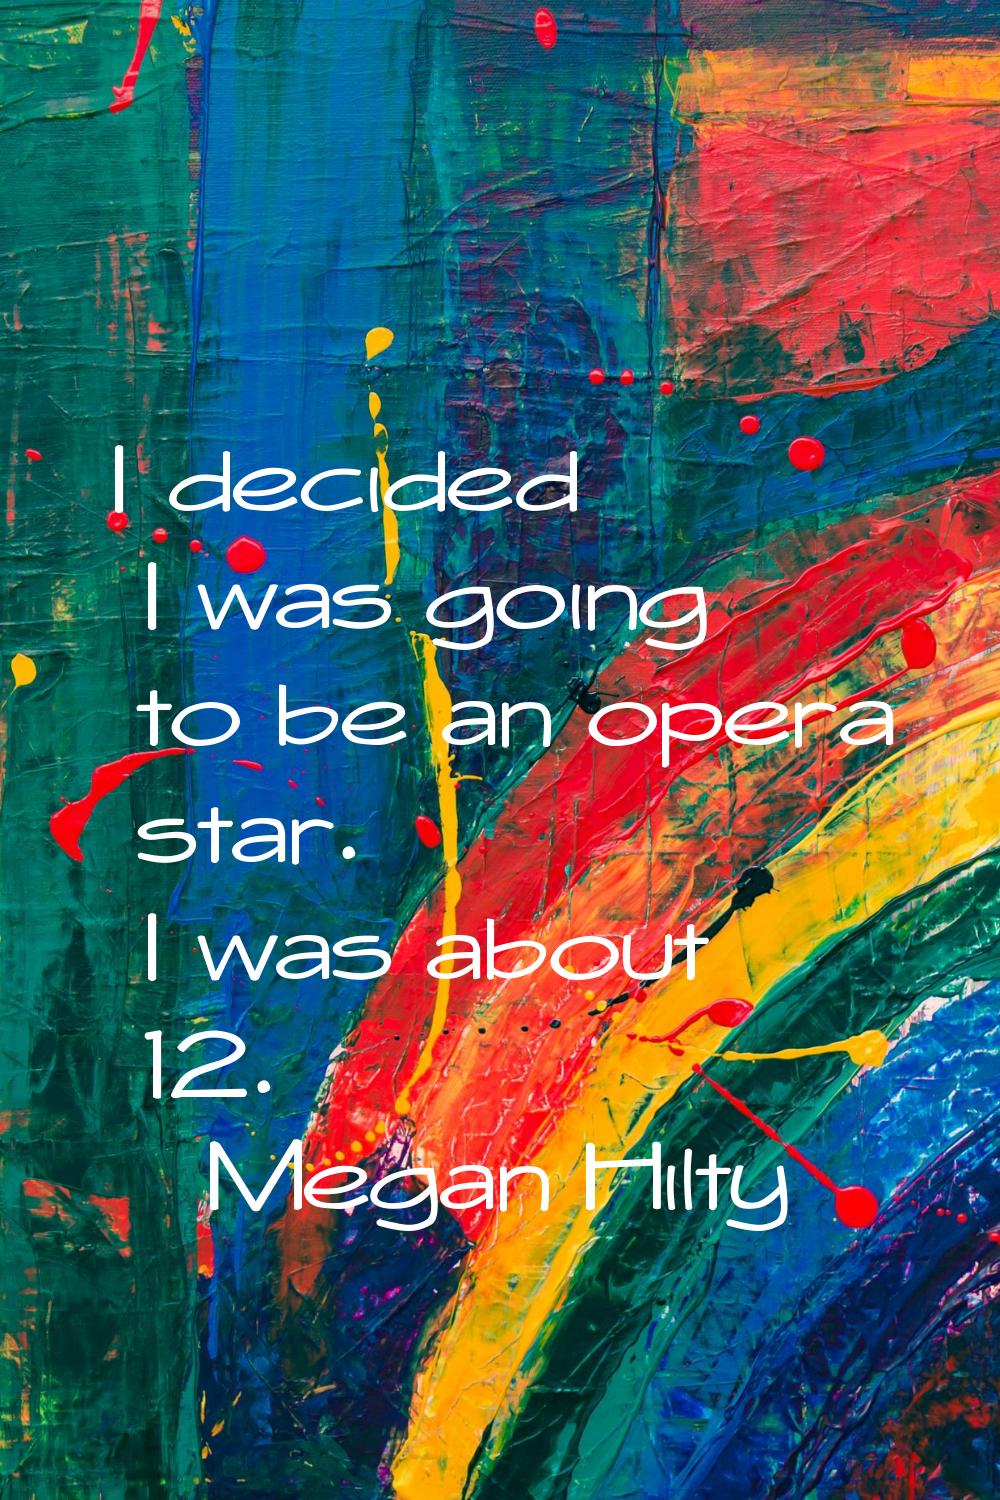 I decided I was going to be an opera star. I was about 12.